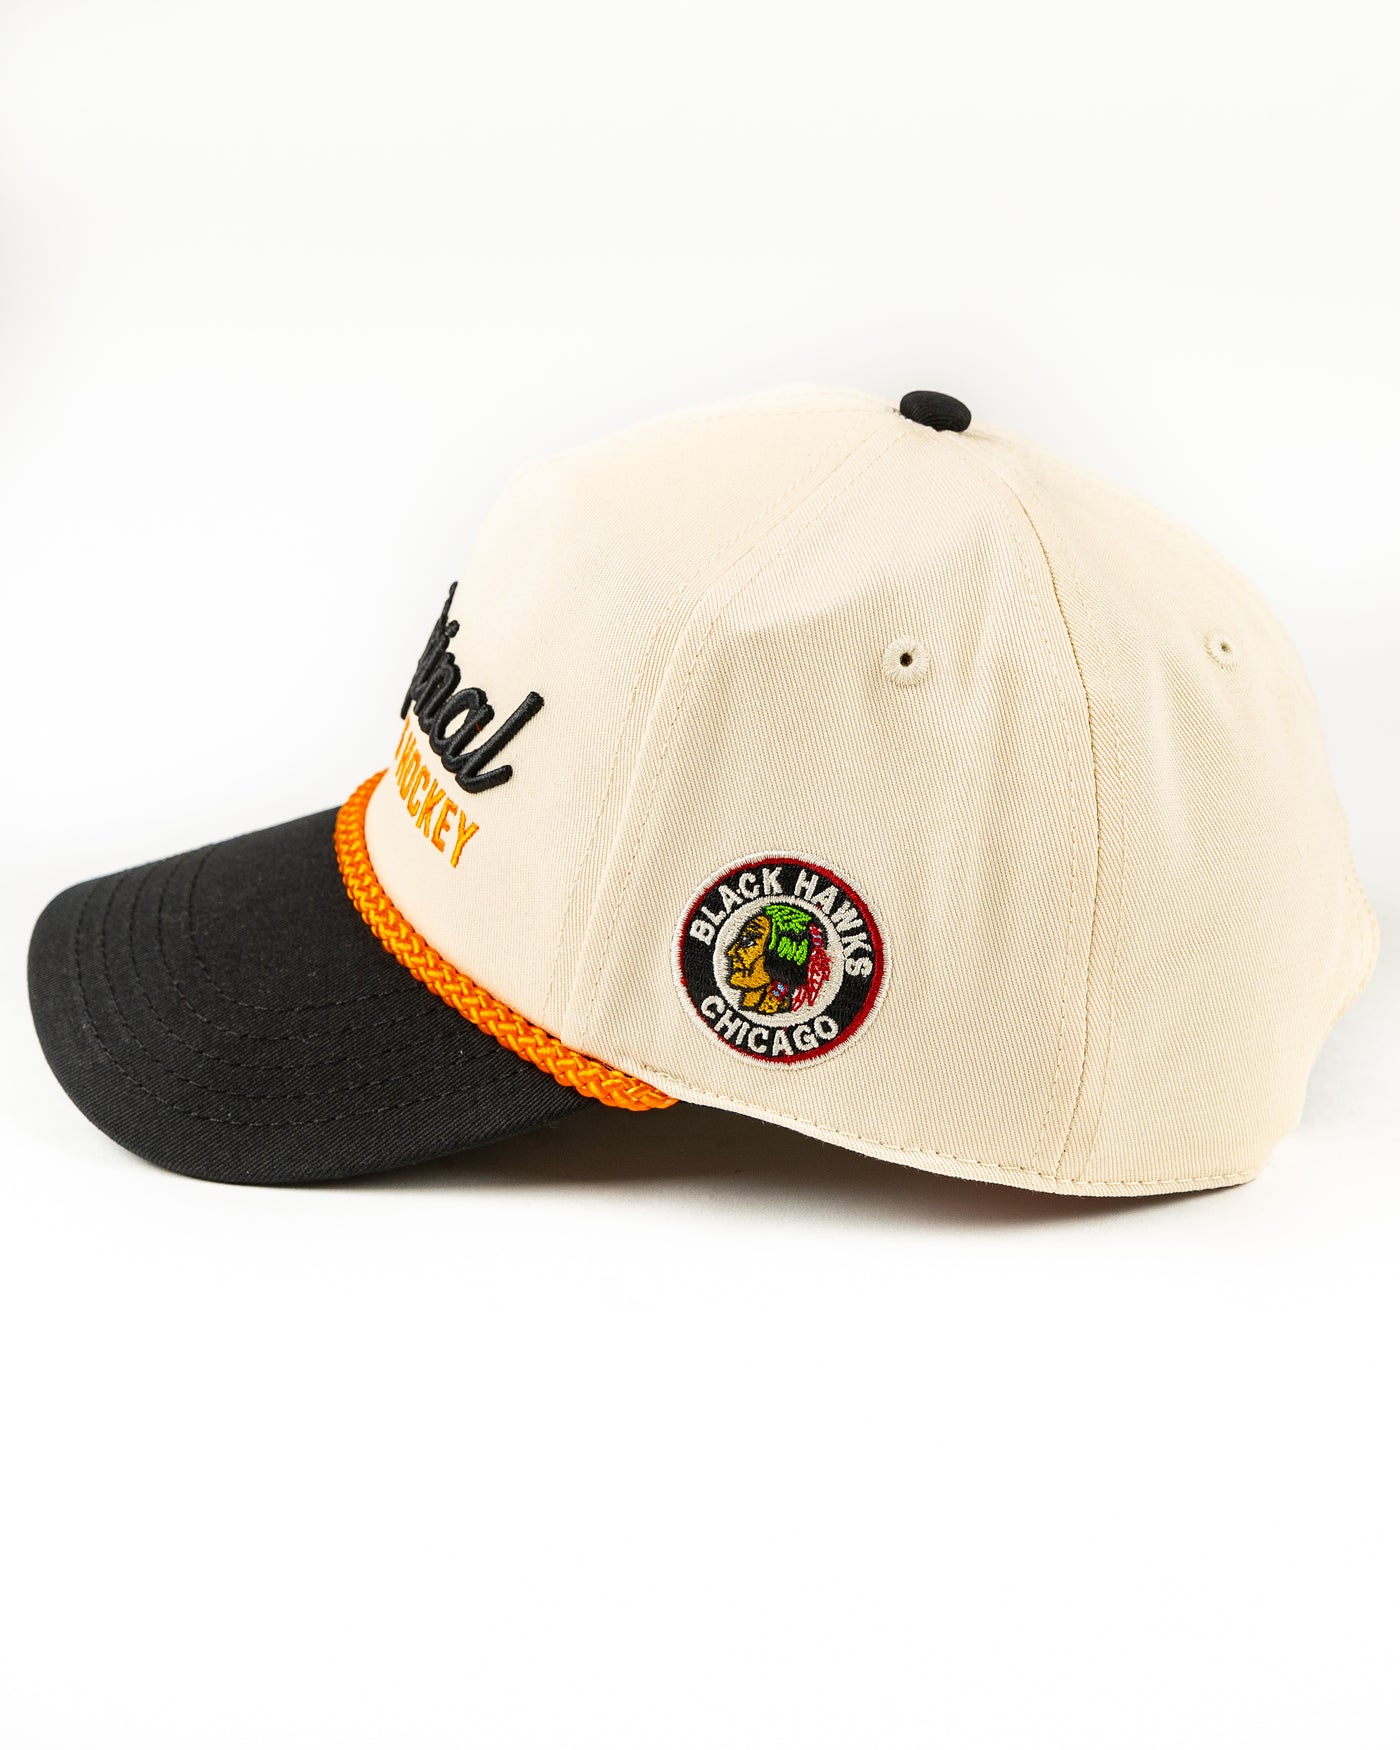 beige, black and orange snapback rope hat with Original Six hockey word graphic across front and vintage Chicago Blackhawks logo embroidered on left side - left side lay flat